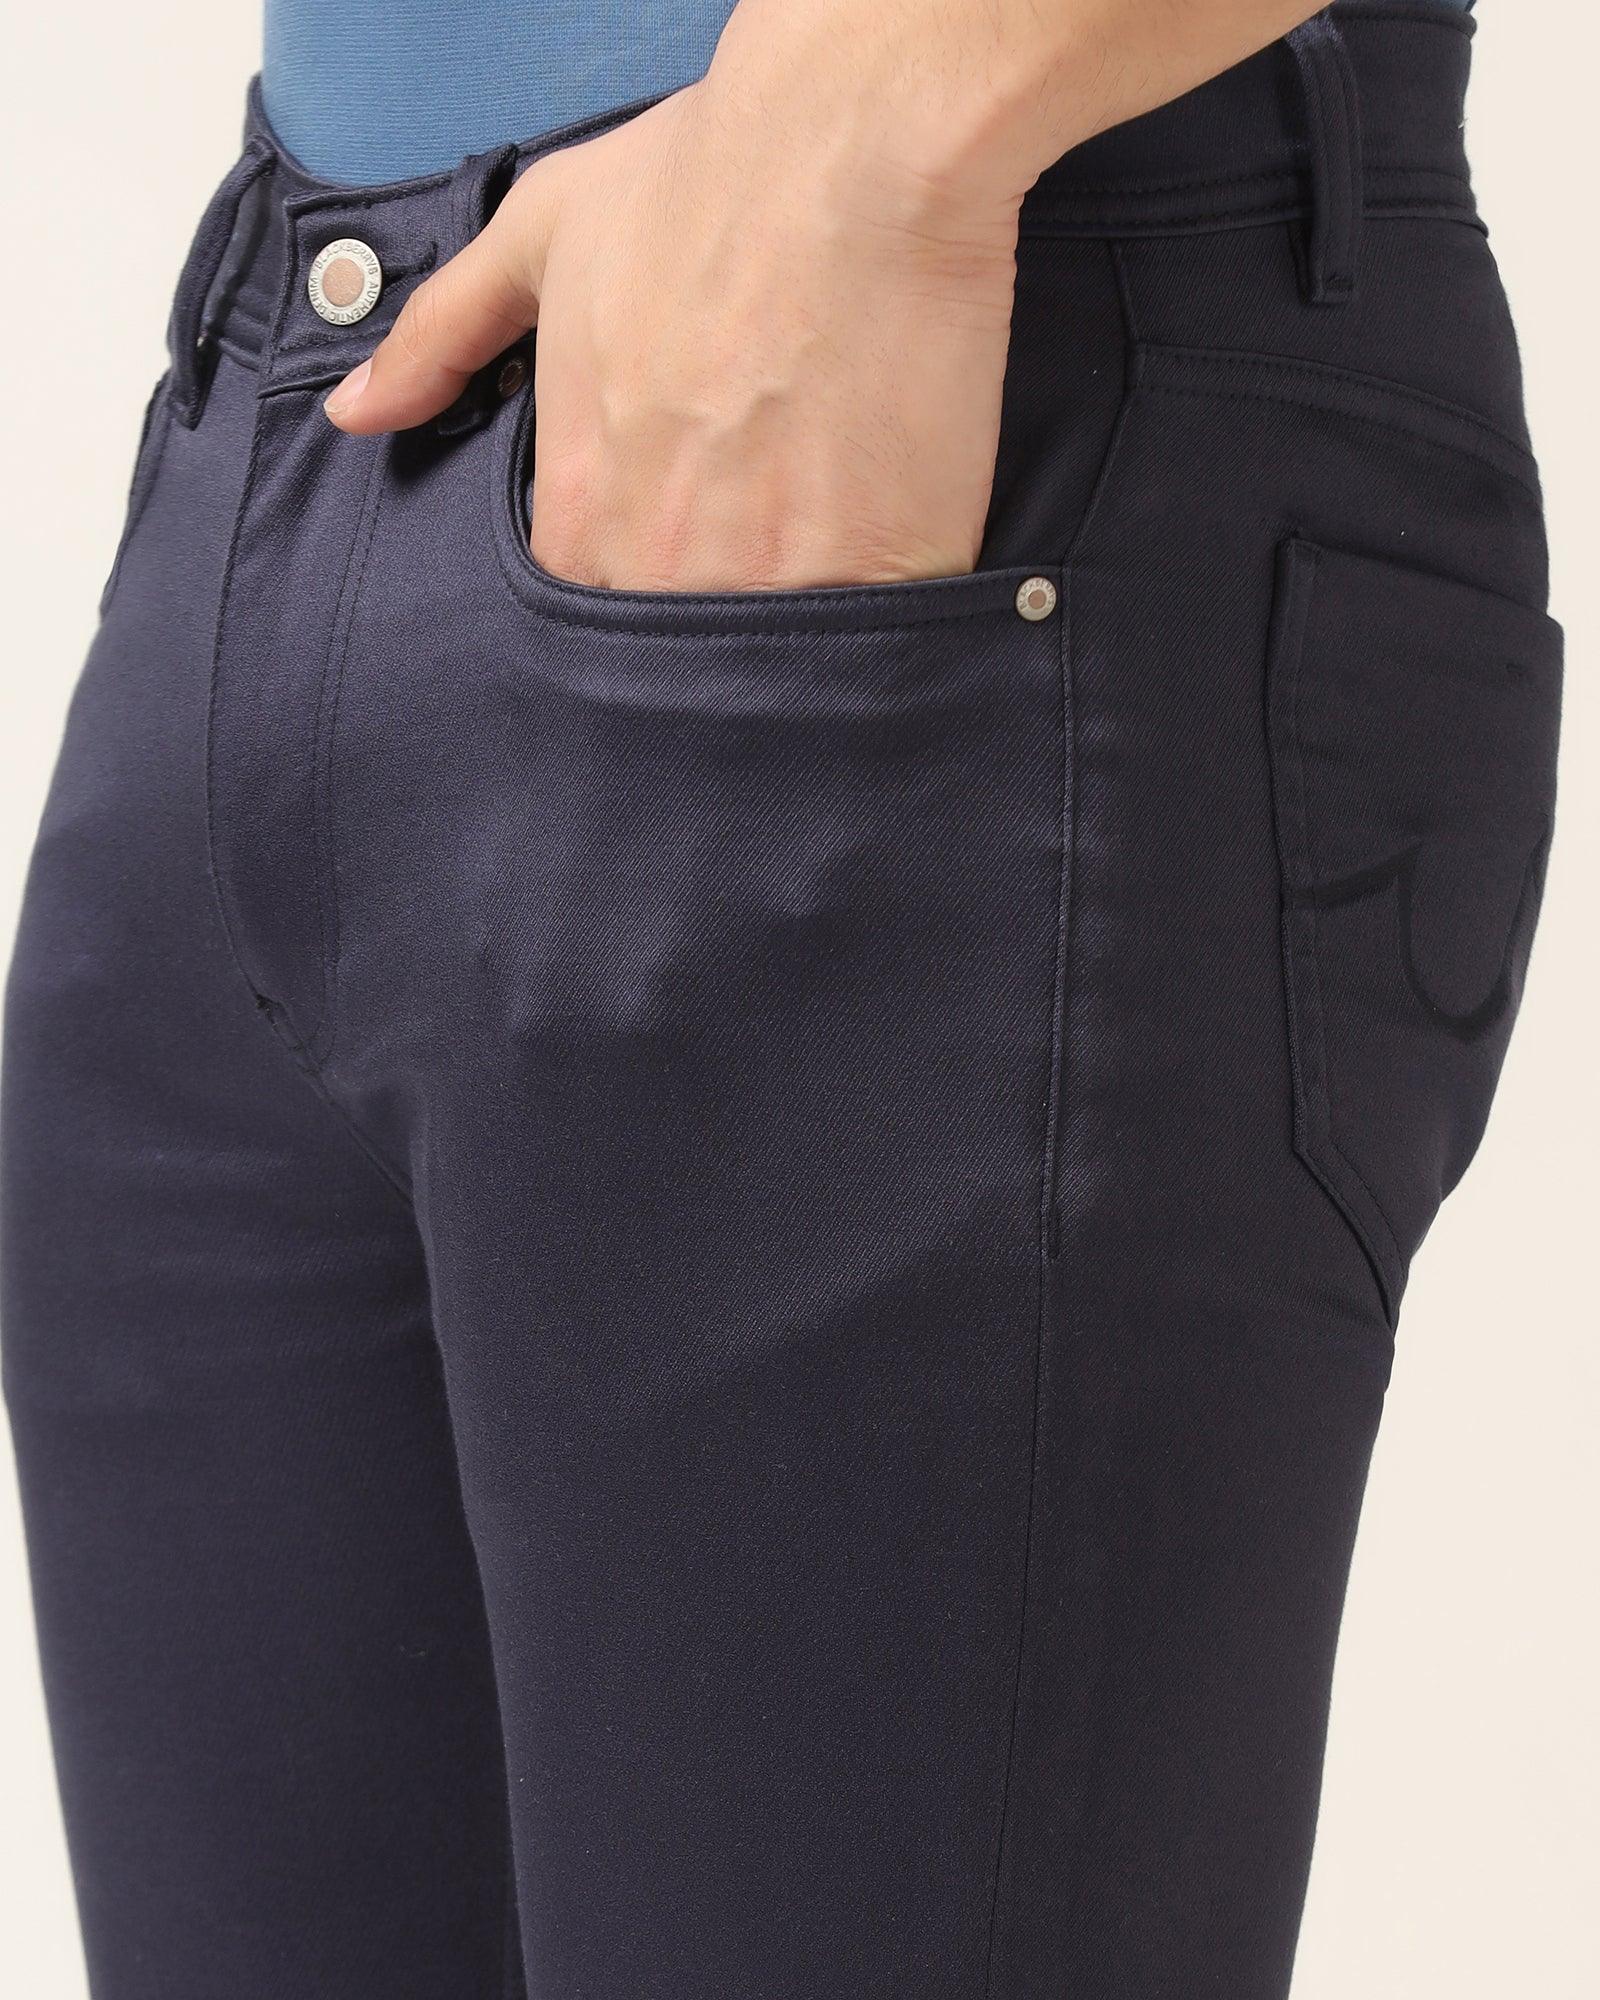 Slim Yonk Fit Navy Textured Jeans - Abto